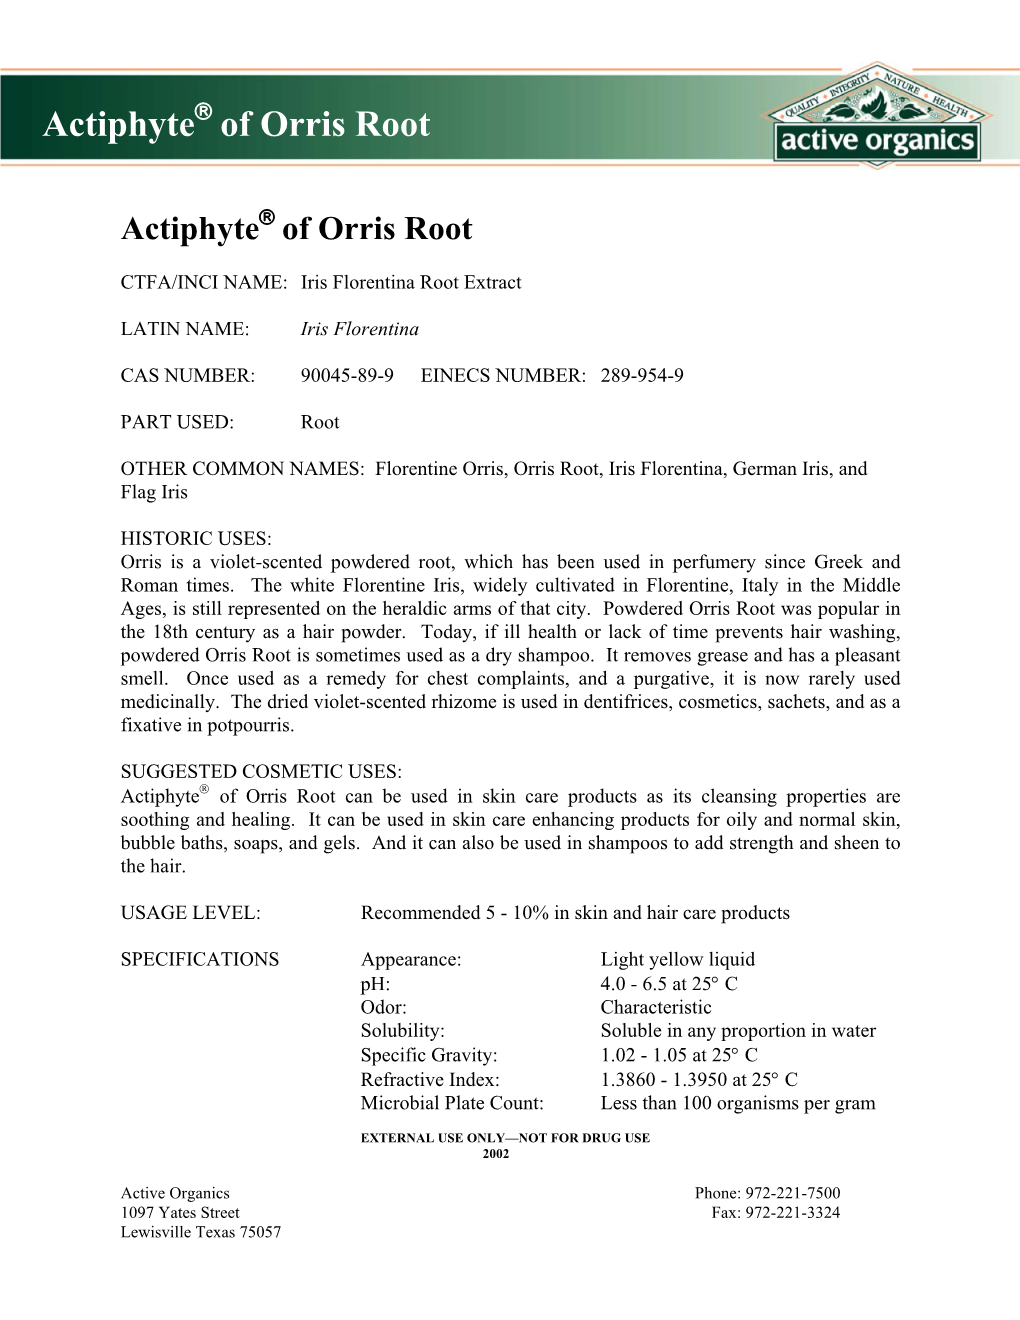 Actiphyte of Orris Root